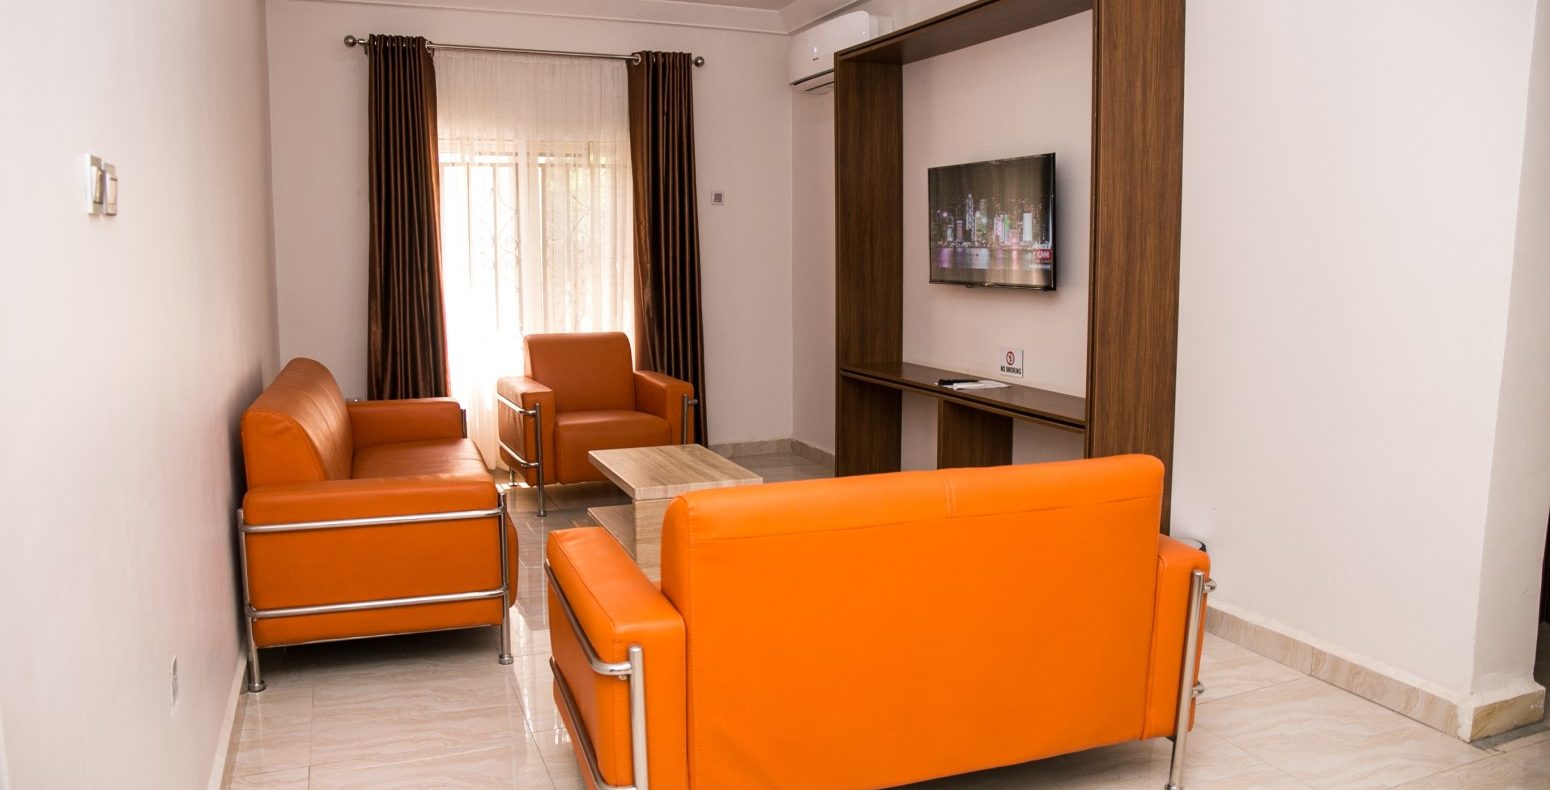 Hotel Royal Suite Two Bedroom Suite In Abuja Fct Nigeria